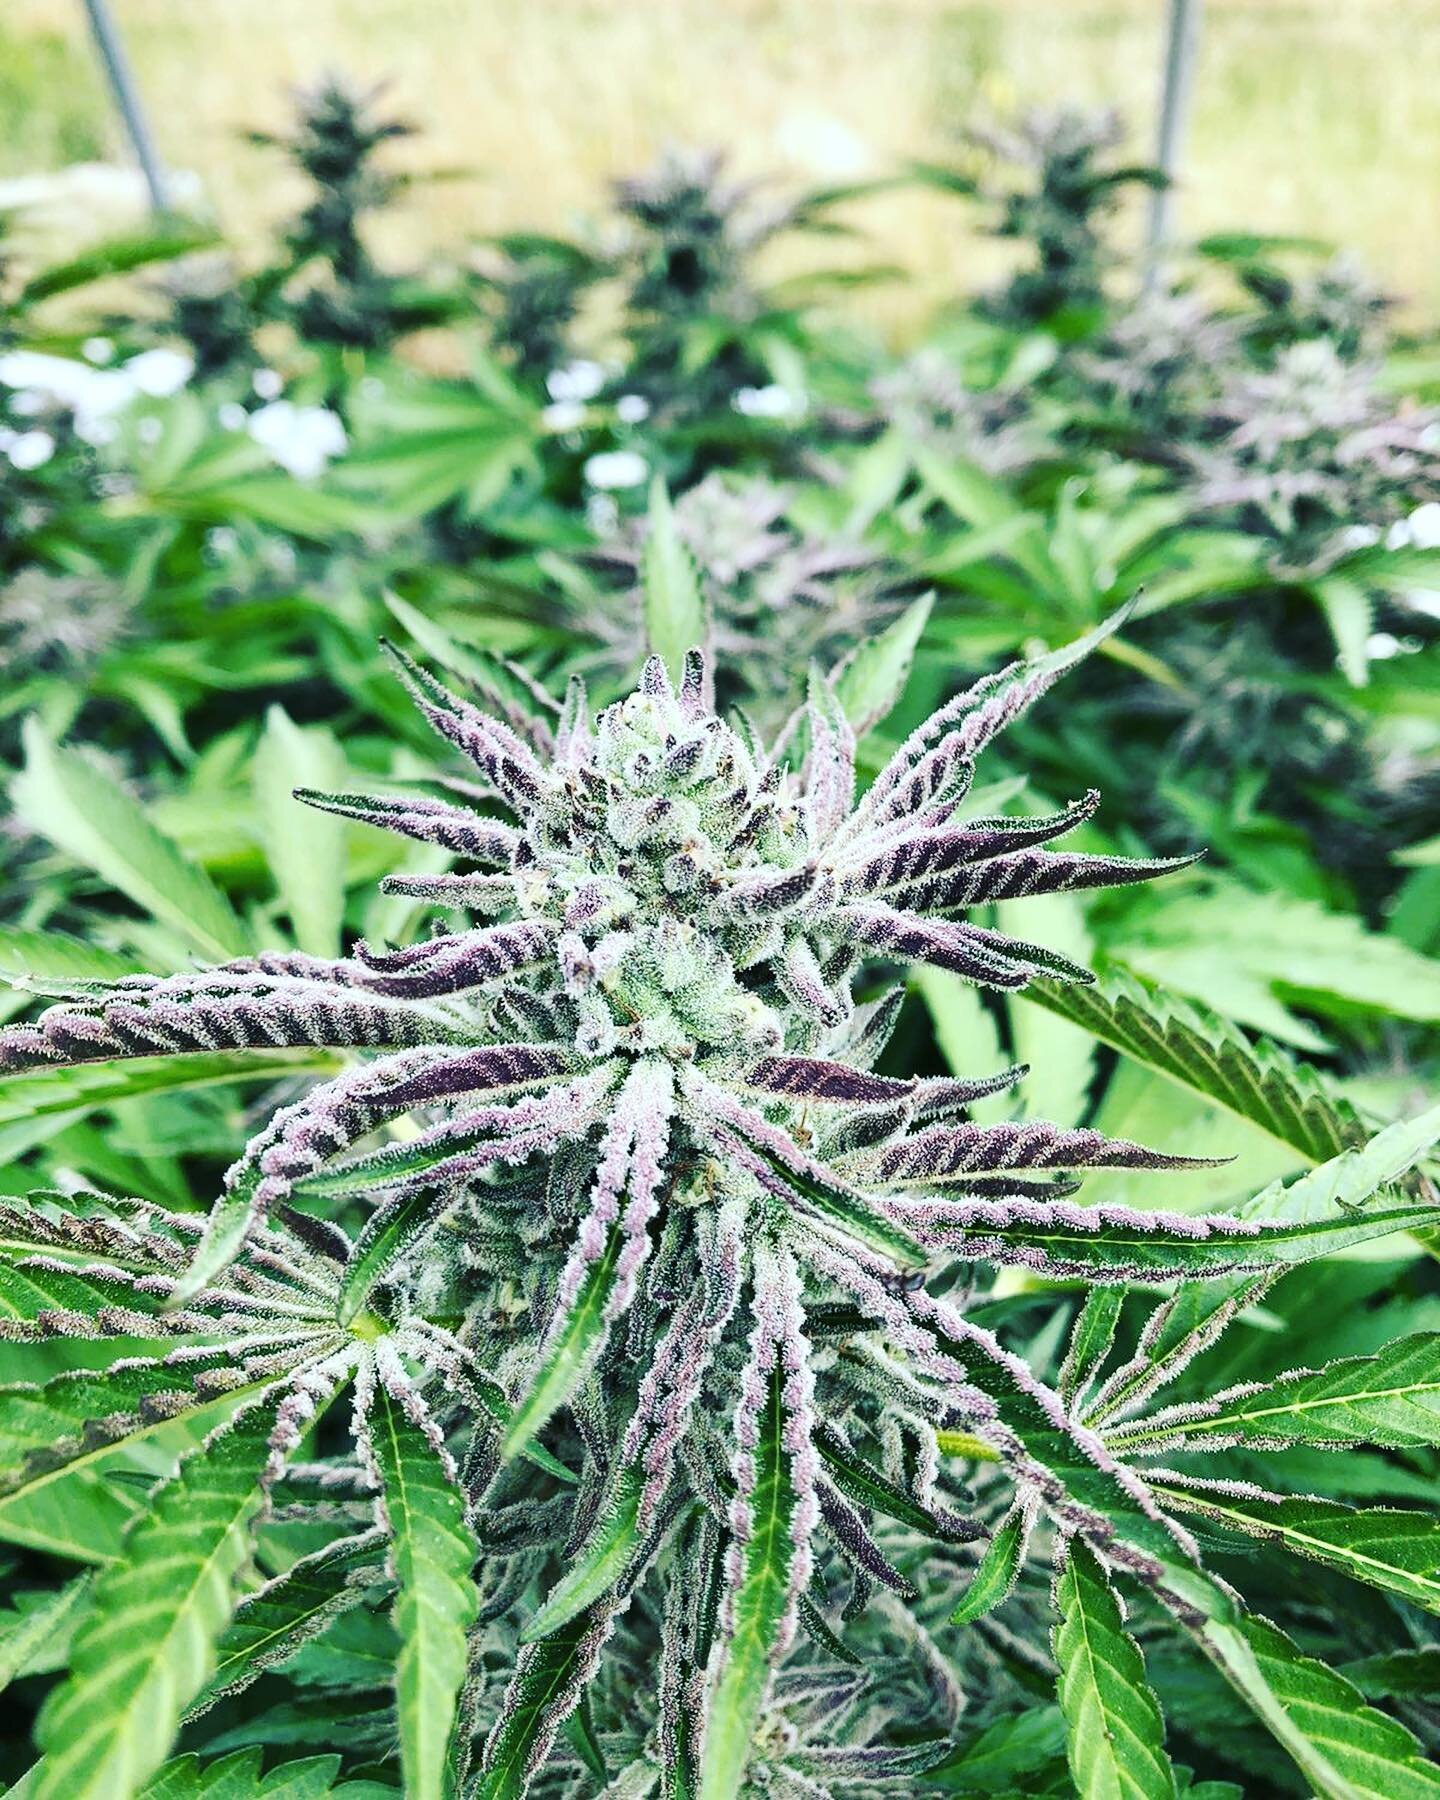 Super excited to have our light dep harvest and curing&hellip;about another month before we have some new strains of flower, rosin, hash, and prerolls available 🙌🏽 #sungrowndep #diversifiedfarm #weedlikechange